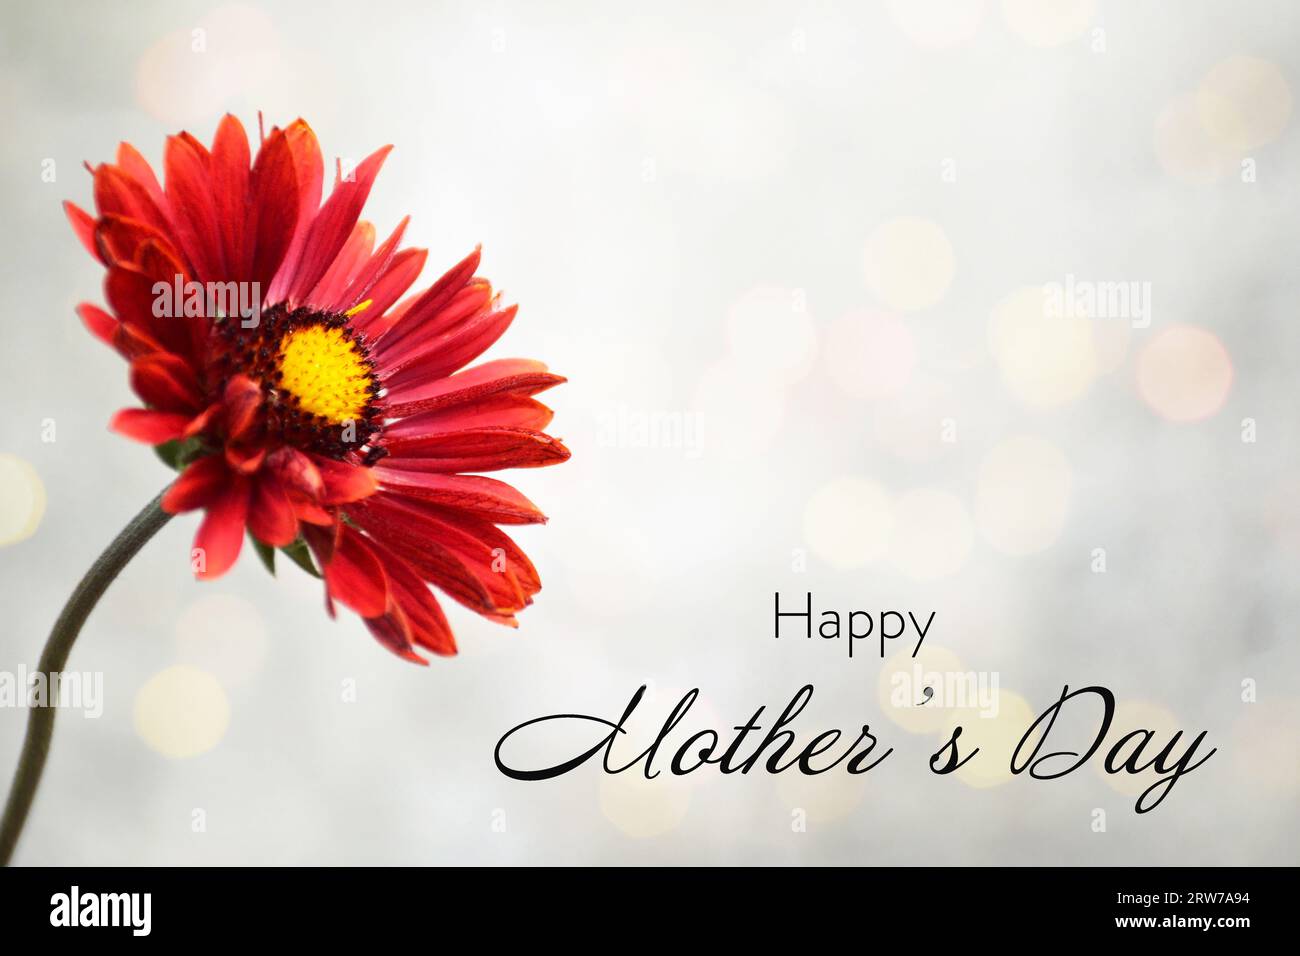 Mothers Day floral greeting card with Gaillardia Burgundy or Blanket flower Stock Photo